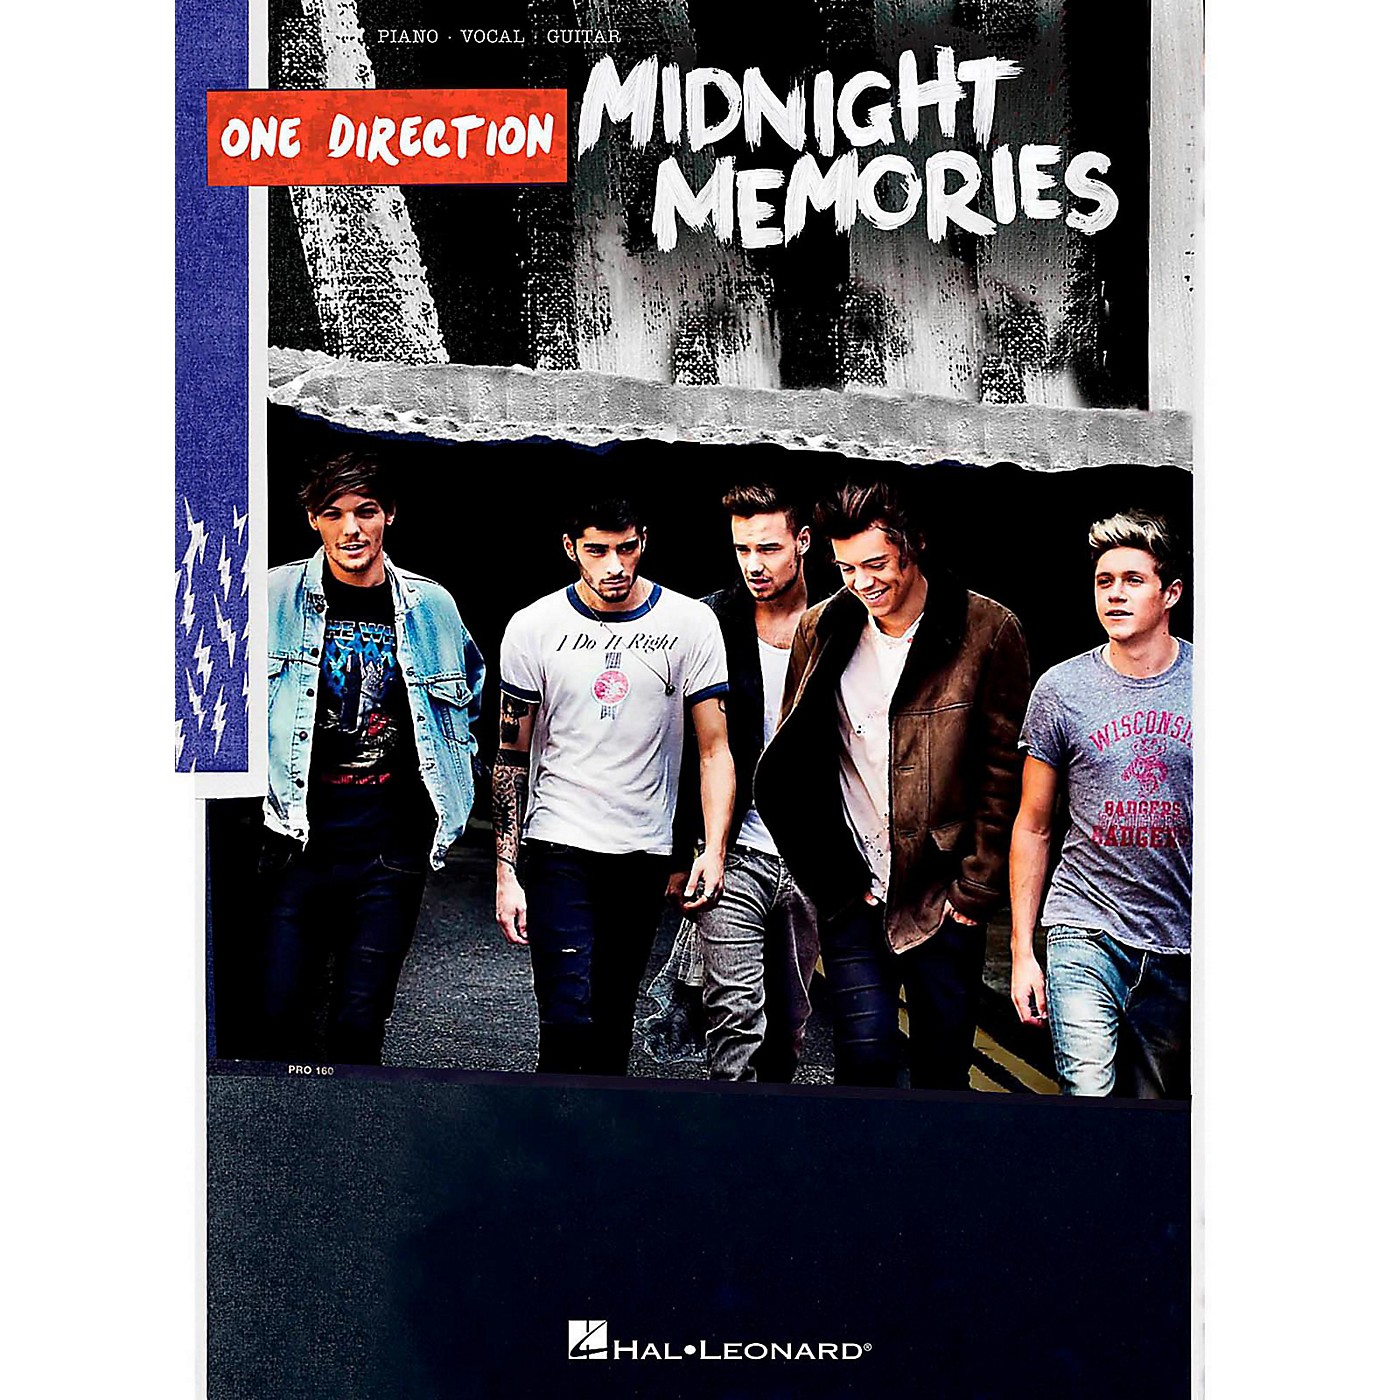 Hal Leonard One Direction - Midnight Memories Piano/Vocal/Guitar Songbook thumbnail